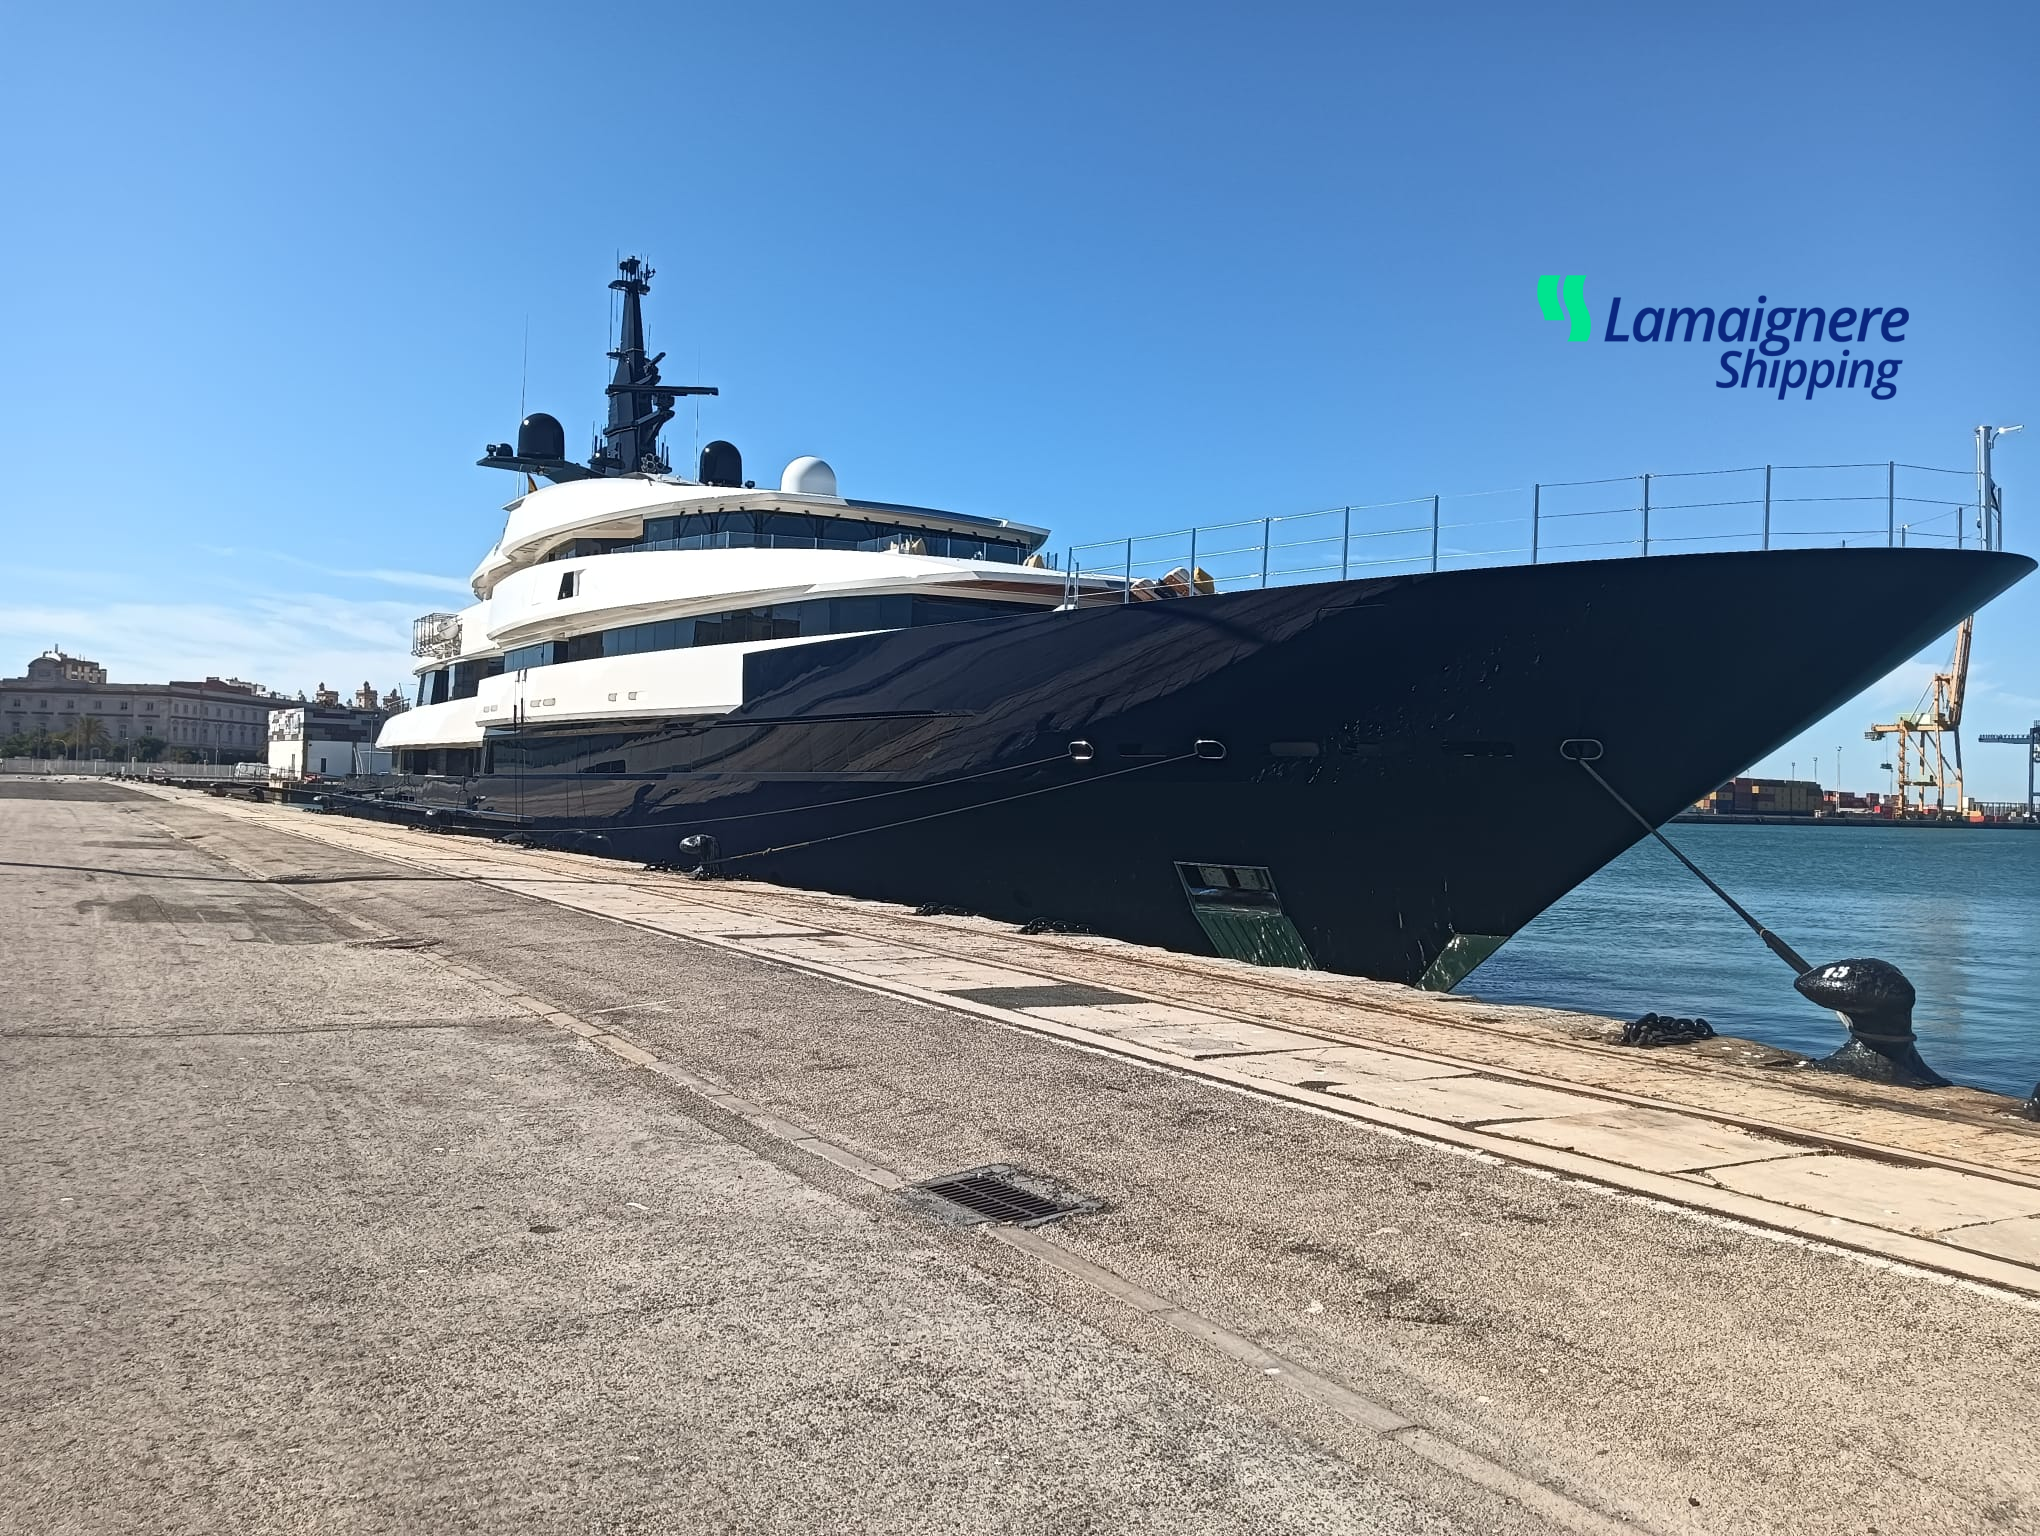 Lamaignere Shipping provides technical assistance to the luxurious yacht Man Of Steel in Seville